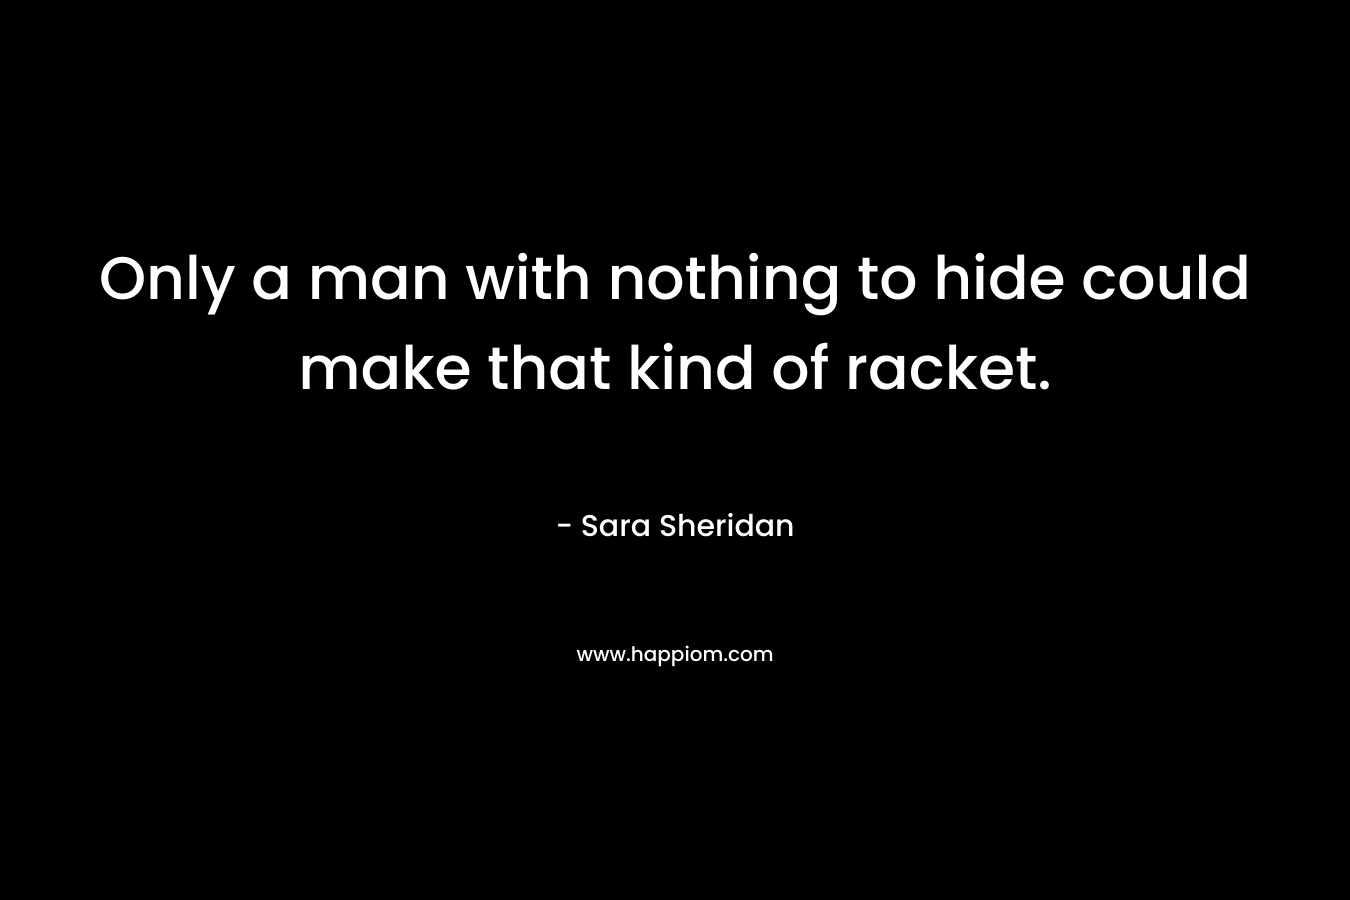 Only a man with nothing to hide could make that kind of racket. – Sara Sheridan